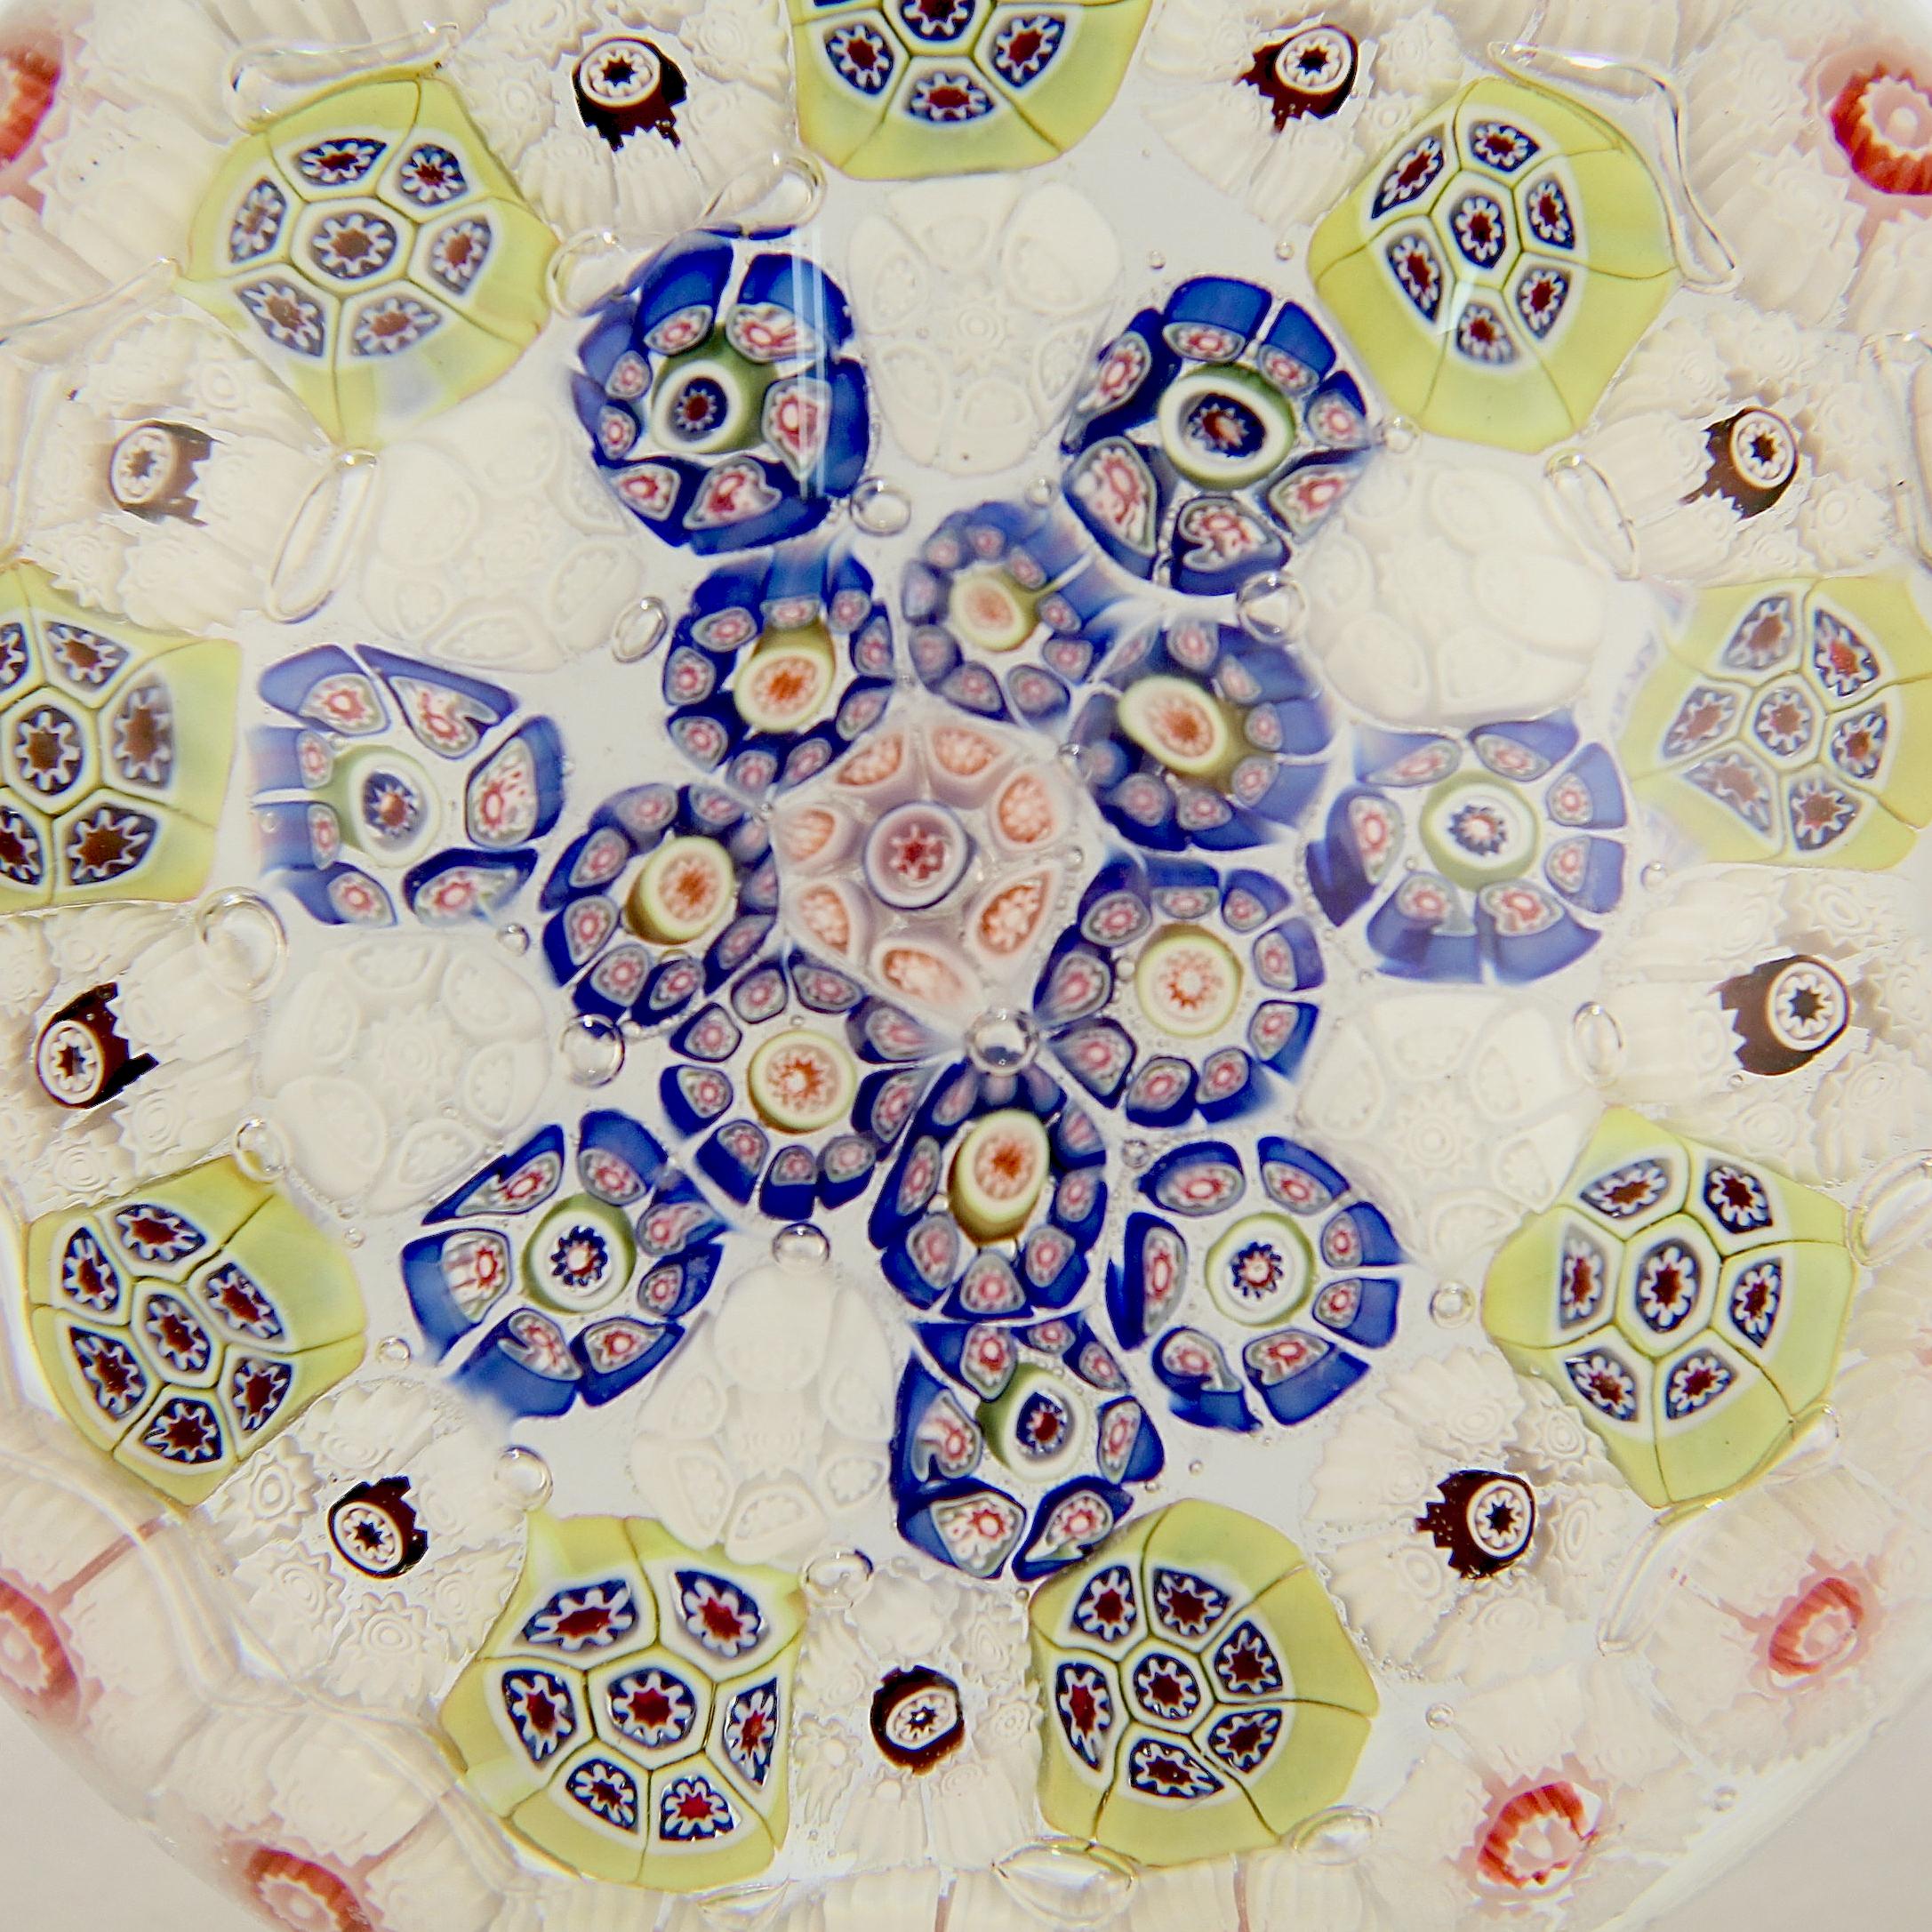 A very fine St. Louis or Baccarat Millefiori art glass paperweight

It has multiple concentric circles of millefiori canes with principally white tones and primary color accents.

The base has a concave polished pontil.

Simply a lovely